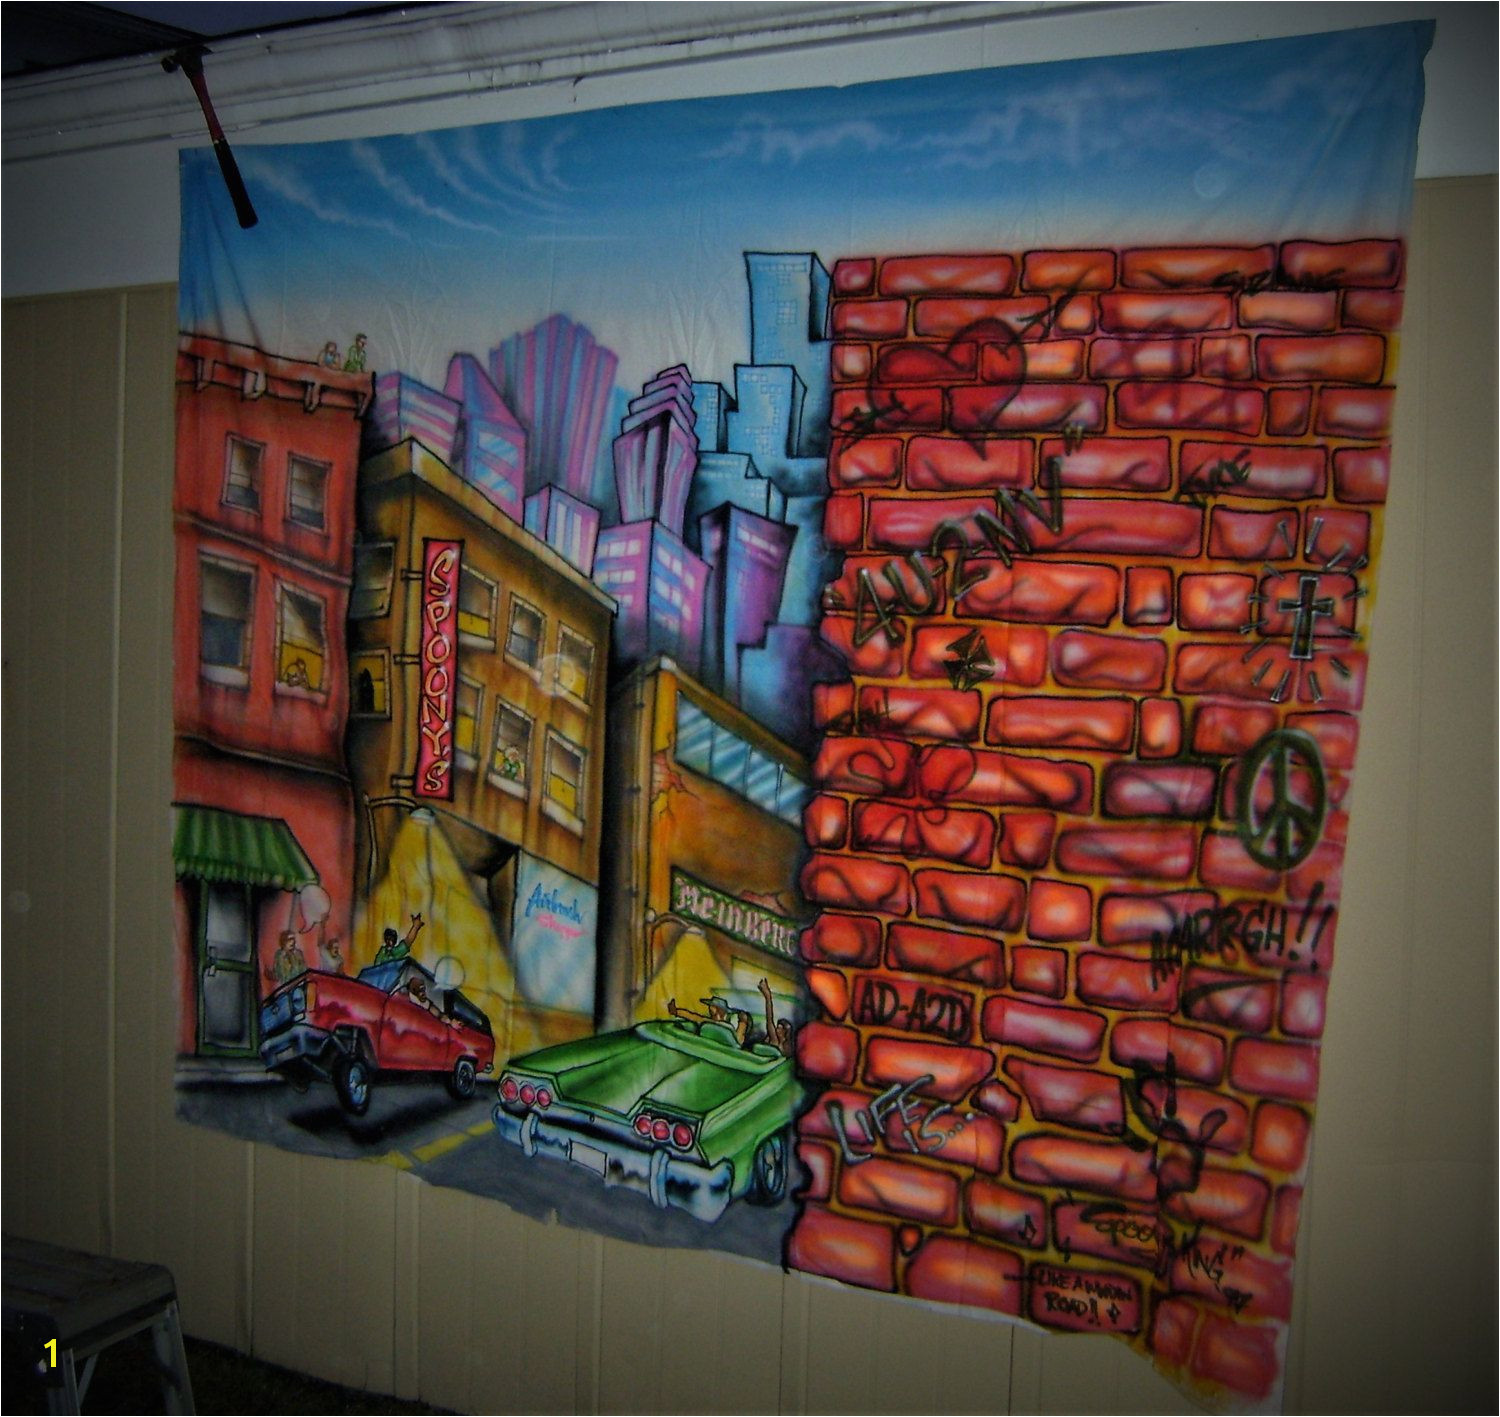 Night Life City Scene Mural hand painted by "Uber Spoony G"